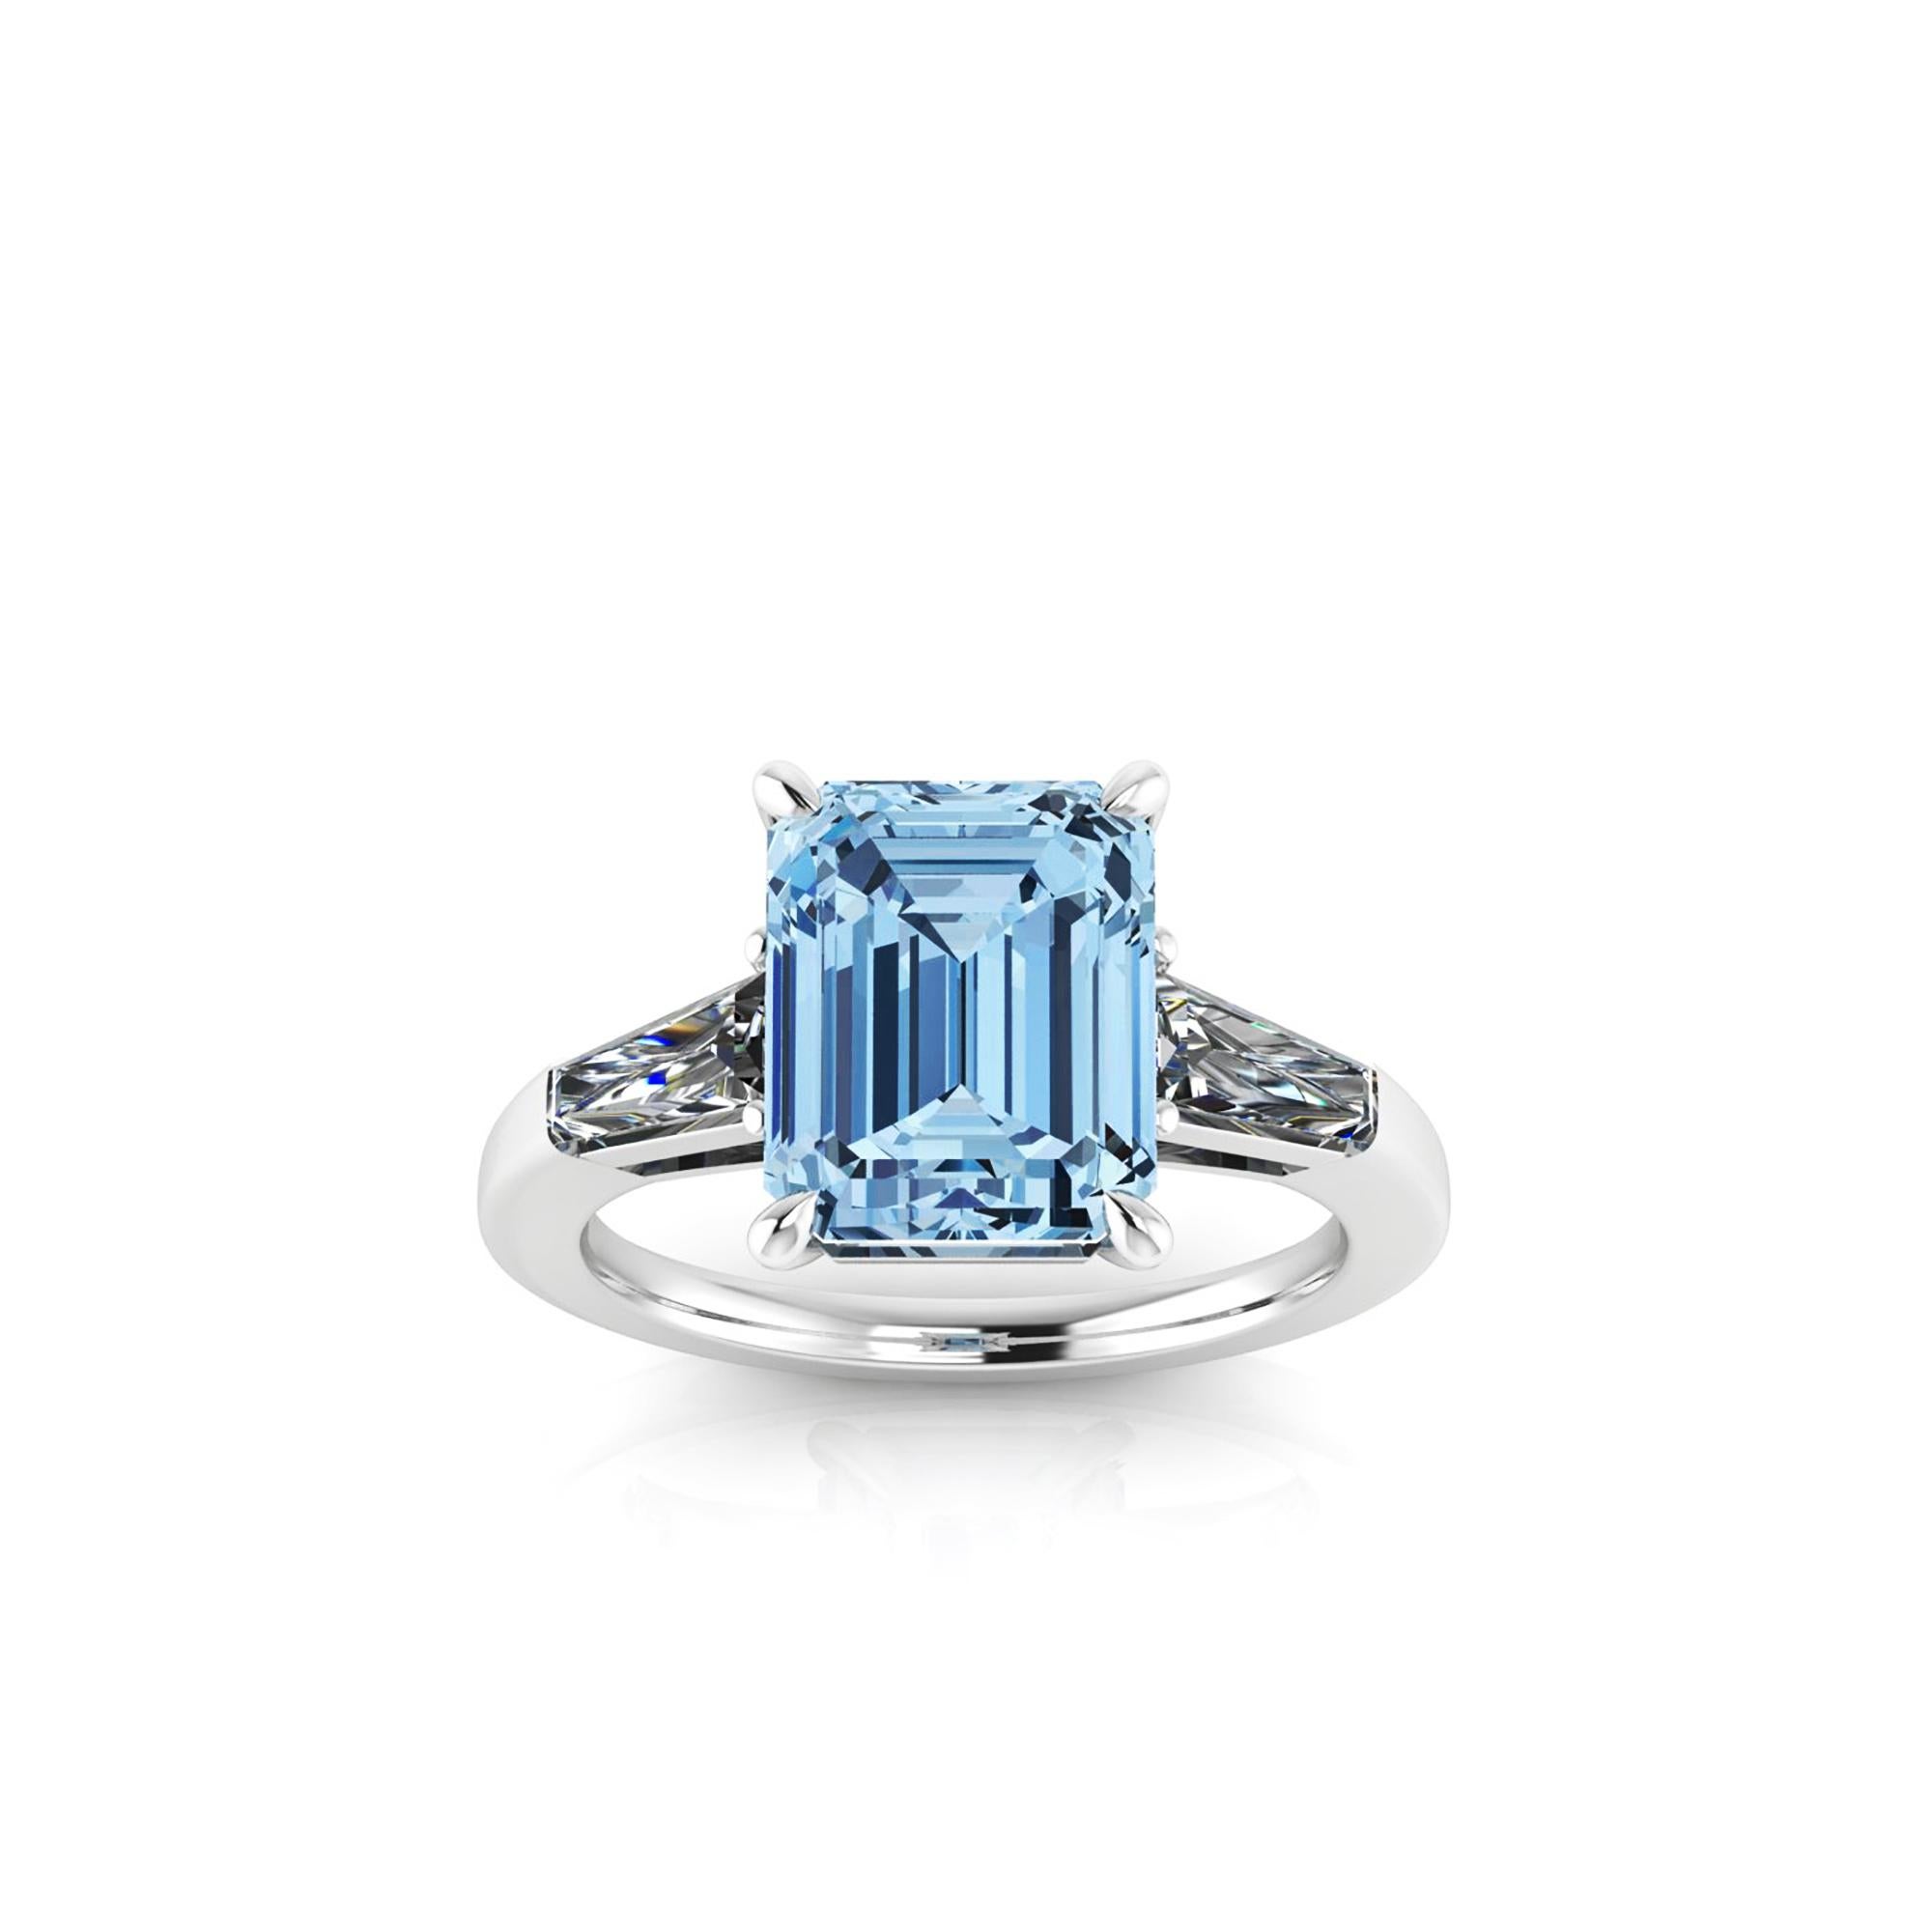 An exquisite 4.54 carat Aquamarine, emerald cut, very high quality color, eye clean gem, accompanied by two, tapered baguette, 0.40 carat total diamonds, G color, Vs clarity, 
set in an hand crafted, delicate and sophisticated looking platinum ring,